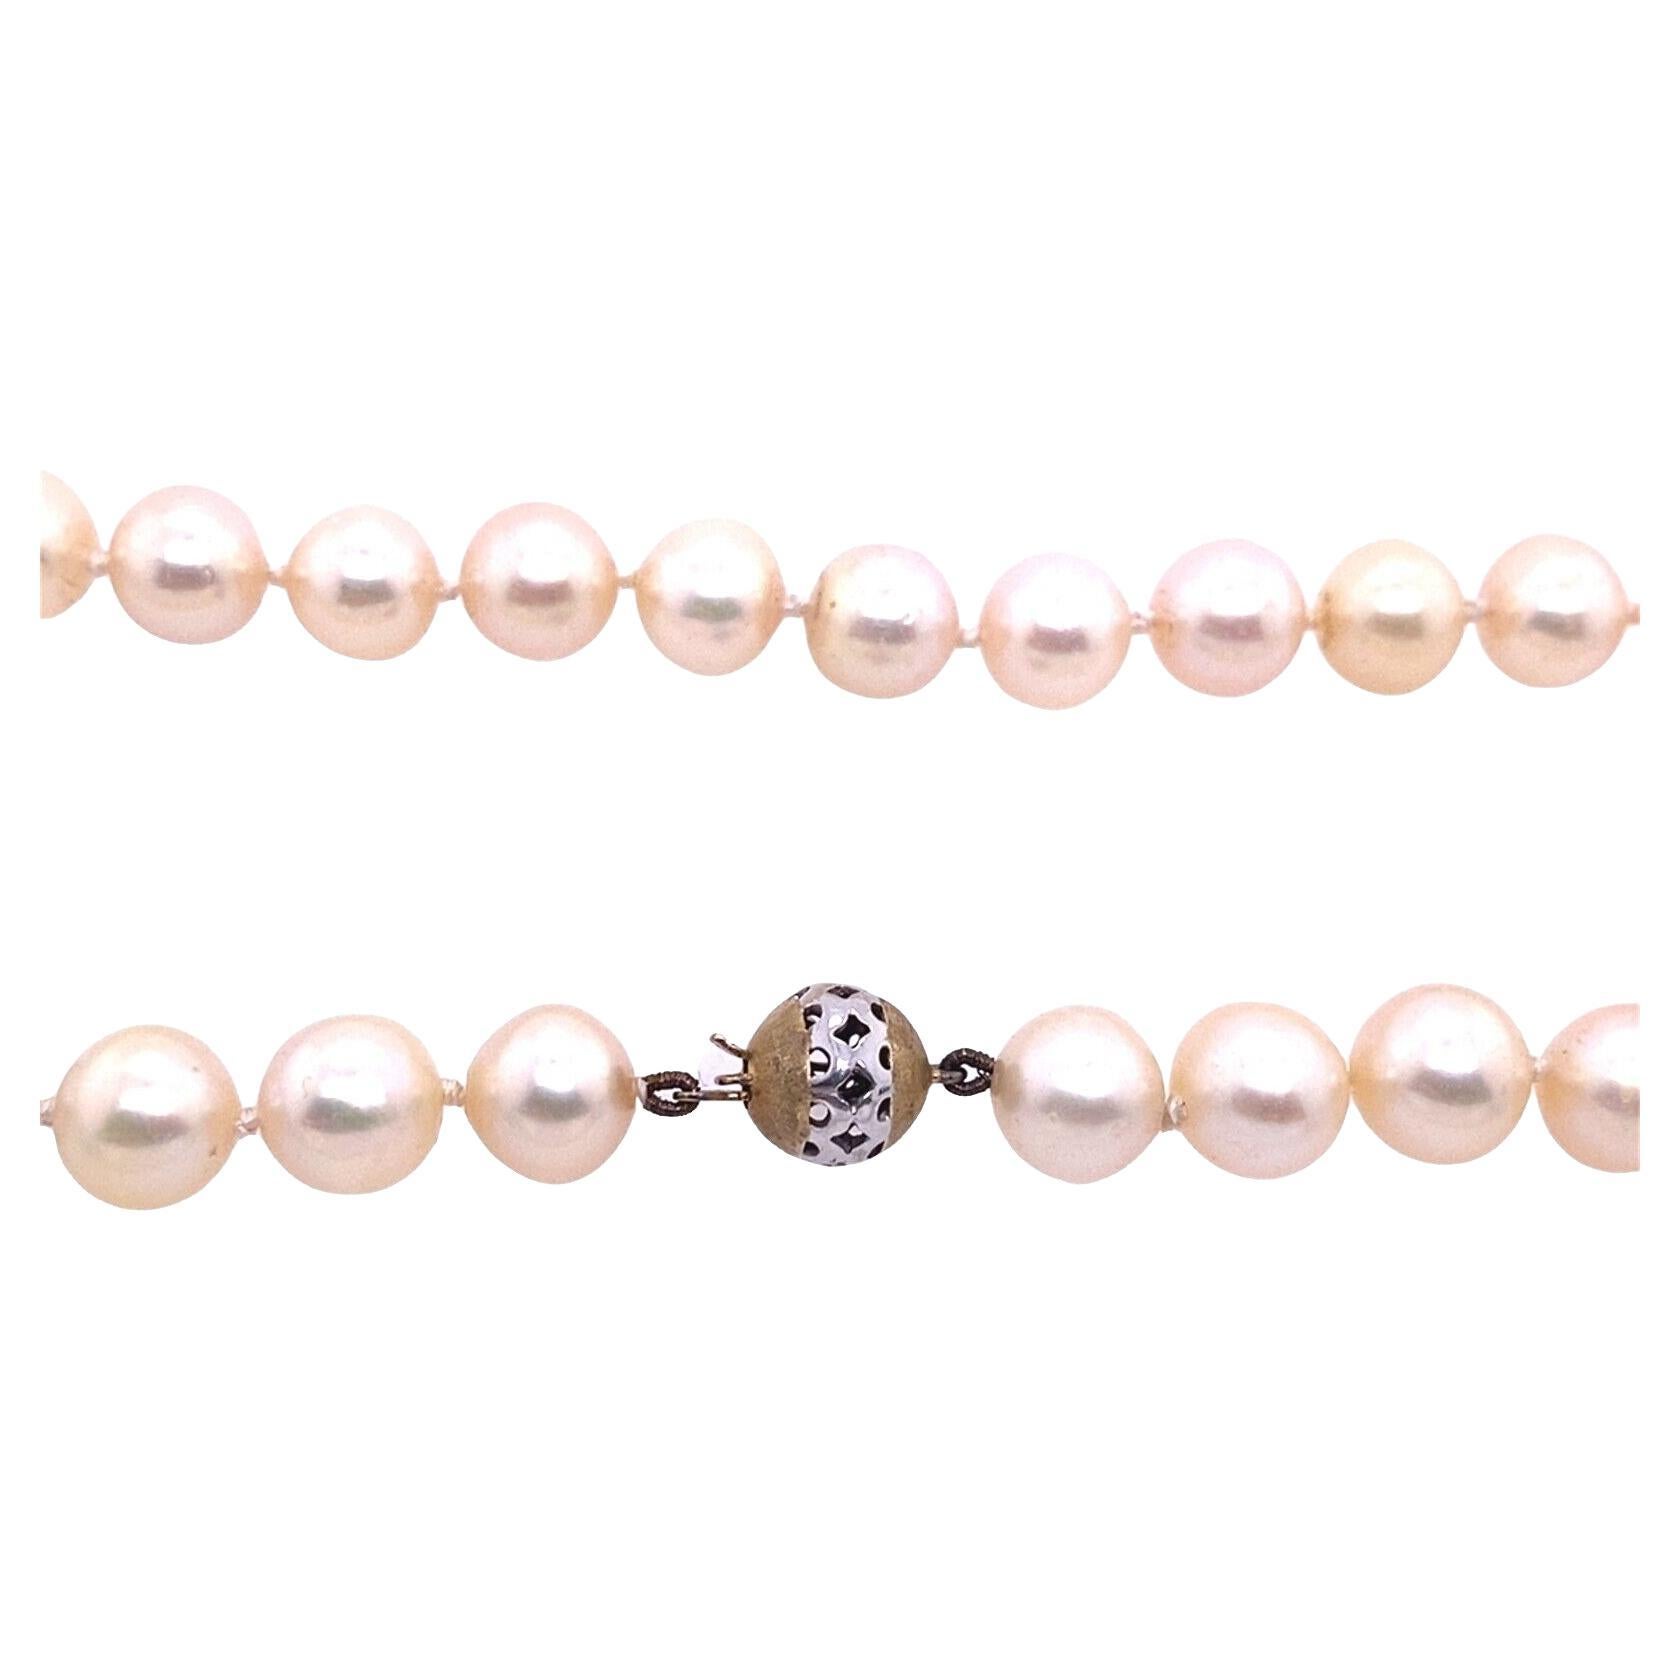 Freshwater Cultural Pearl Necklace Pearls with 14ct Yellow & Gold Clasp